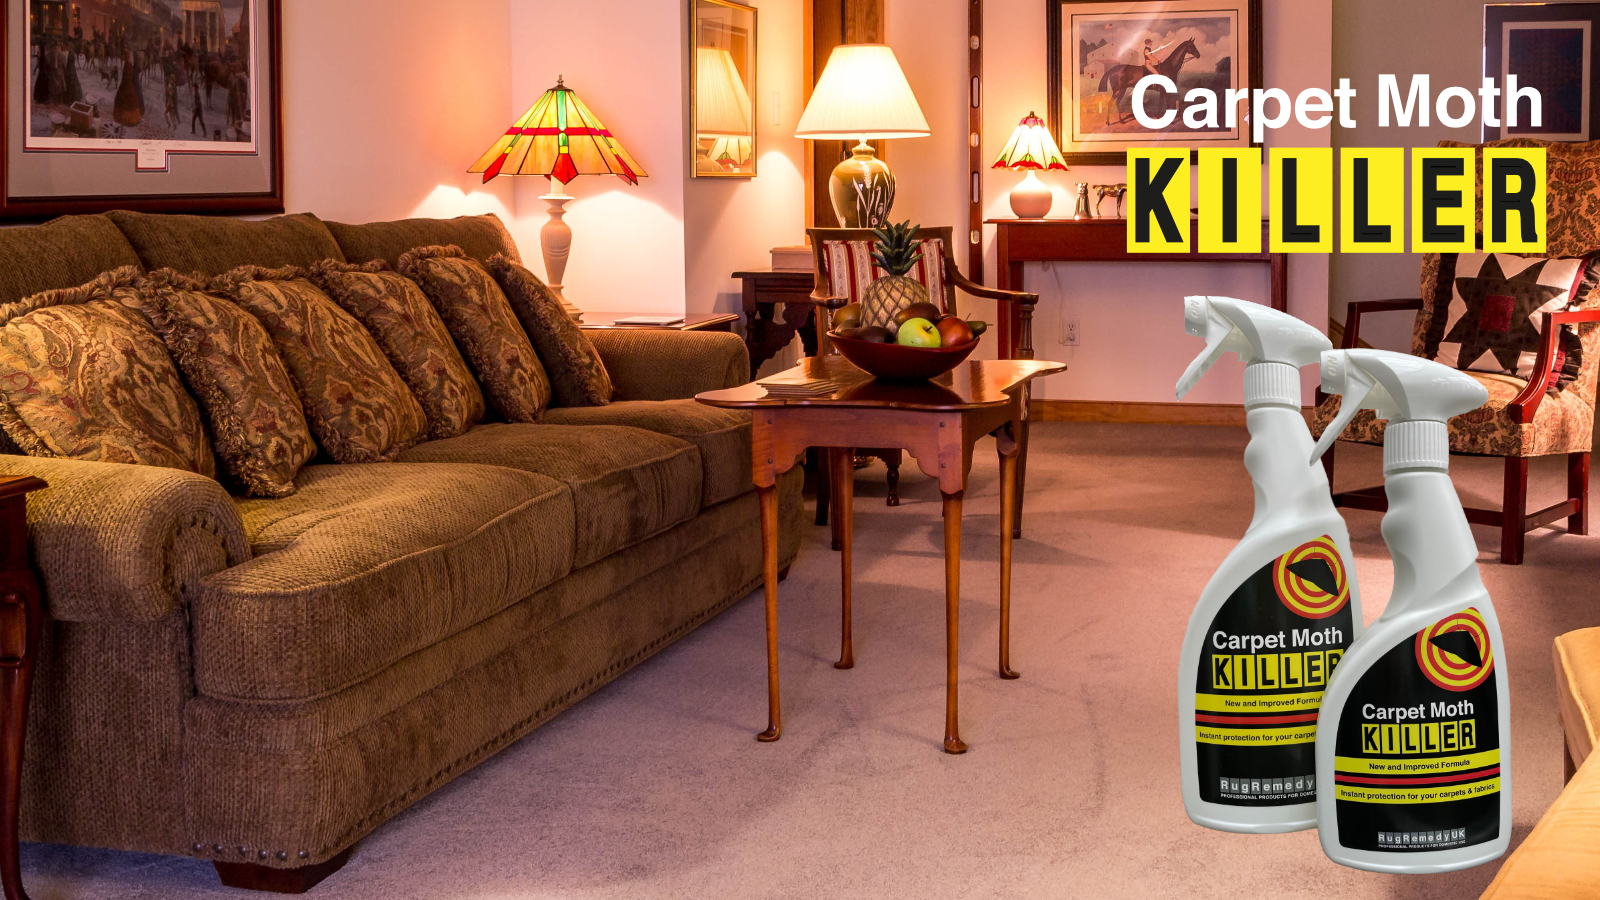 Picture of a sitting room with a rug and Carpet Moth Killer bottles.